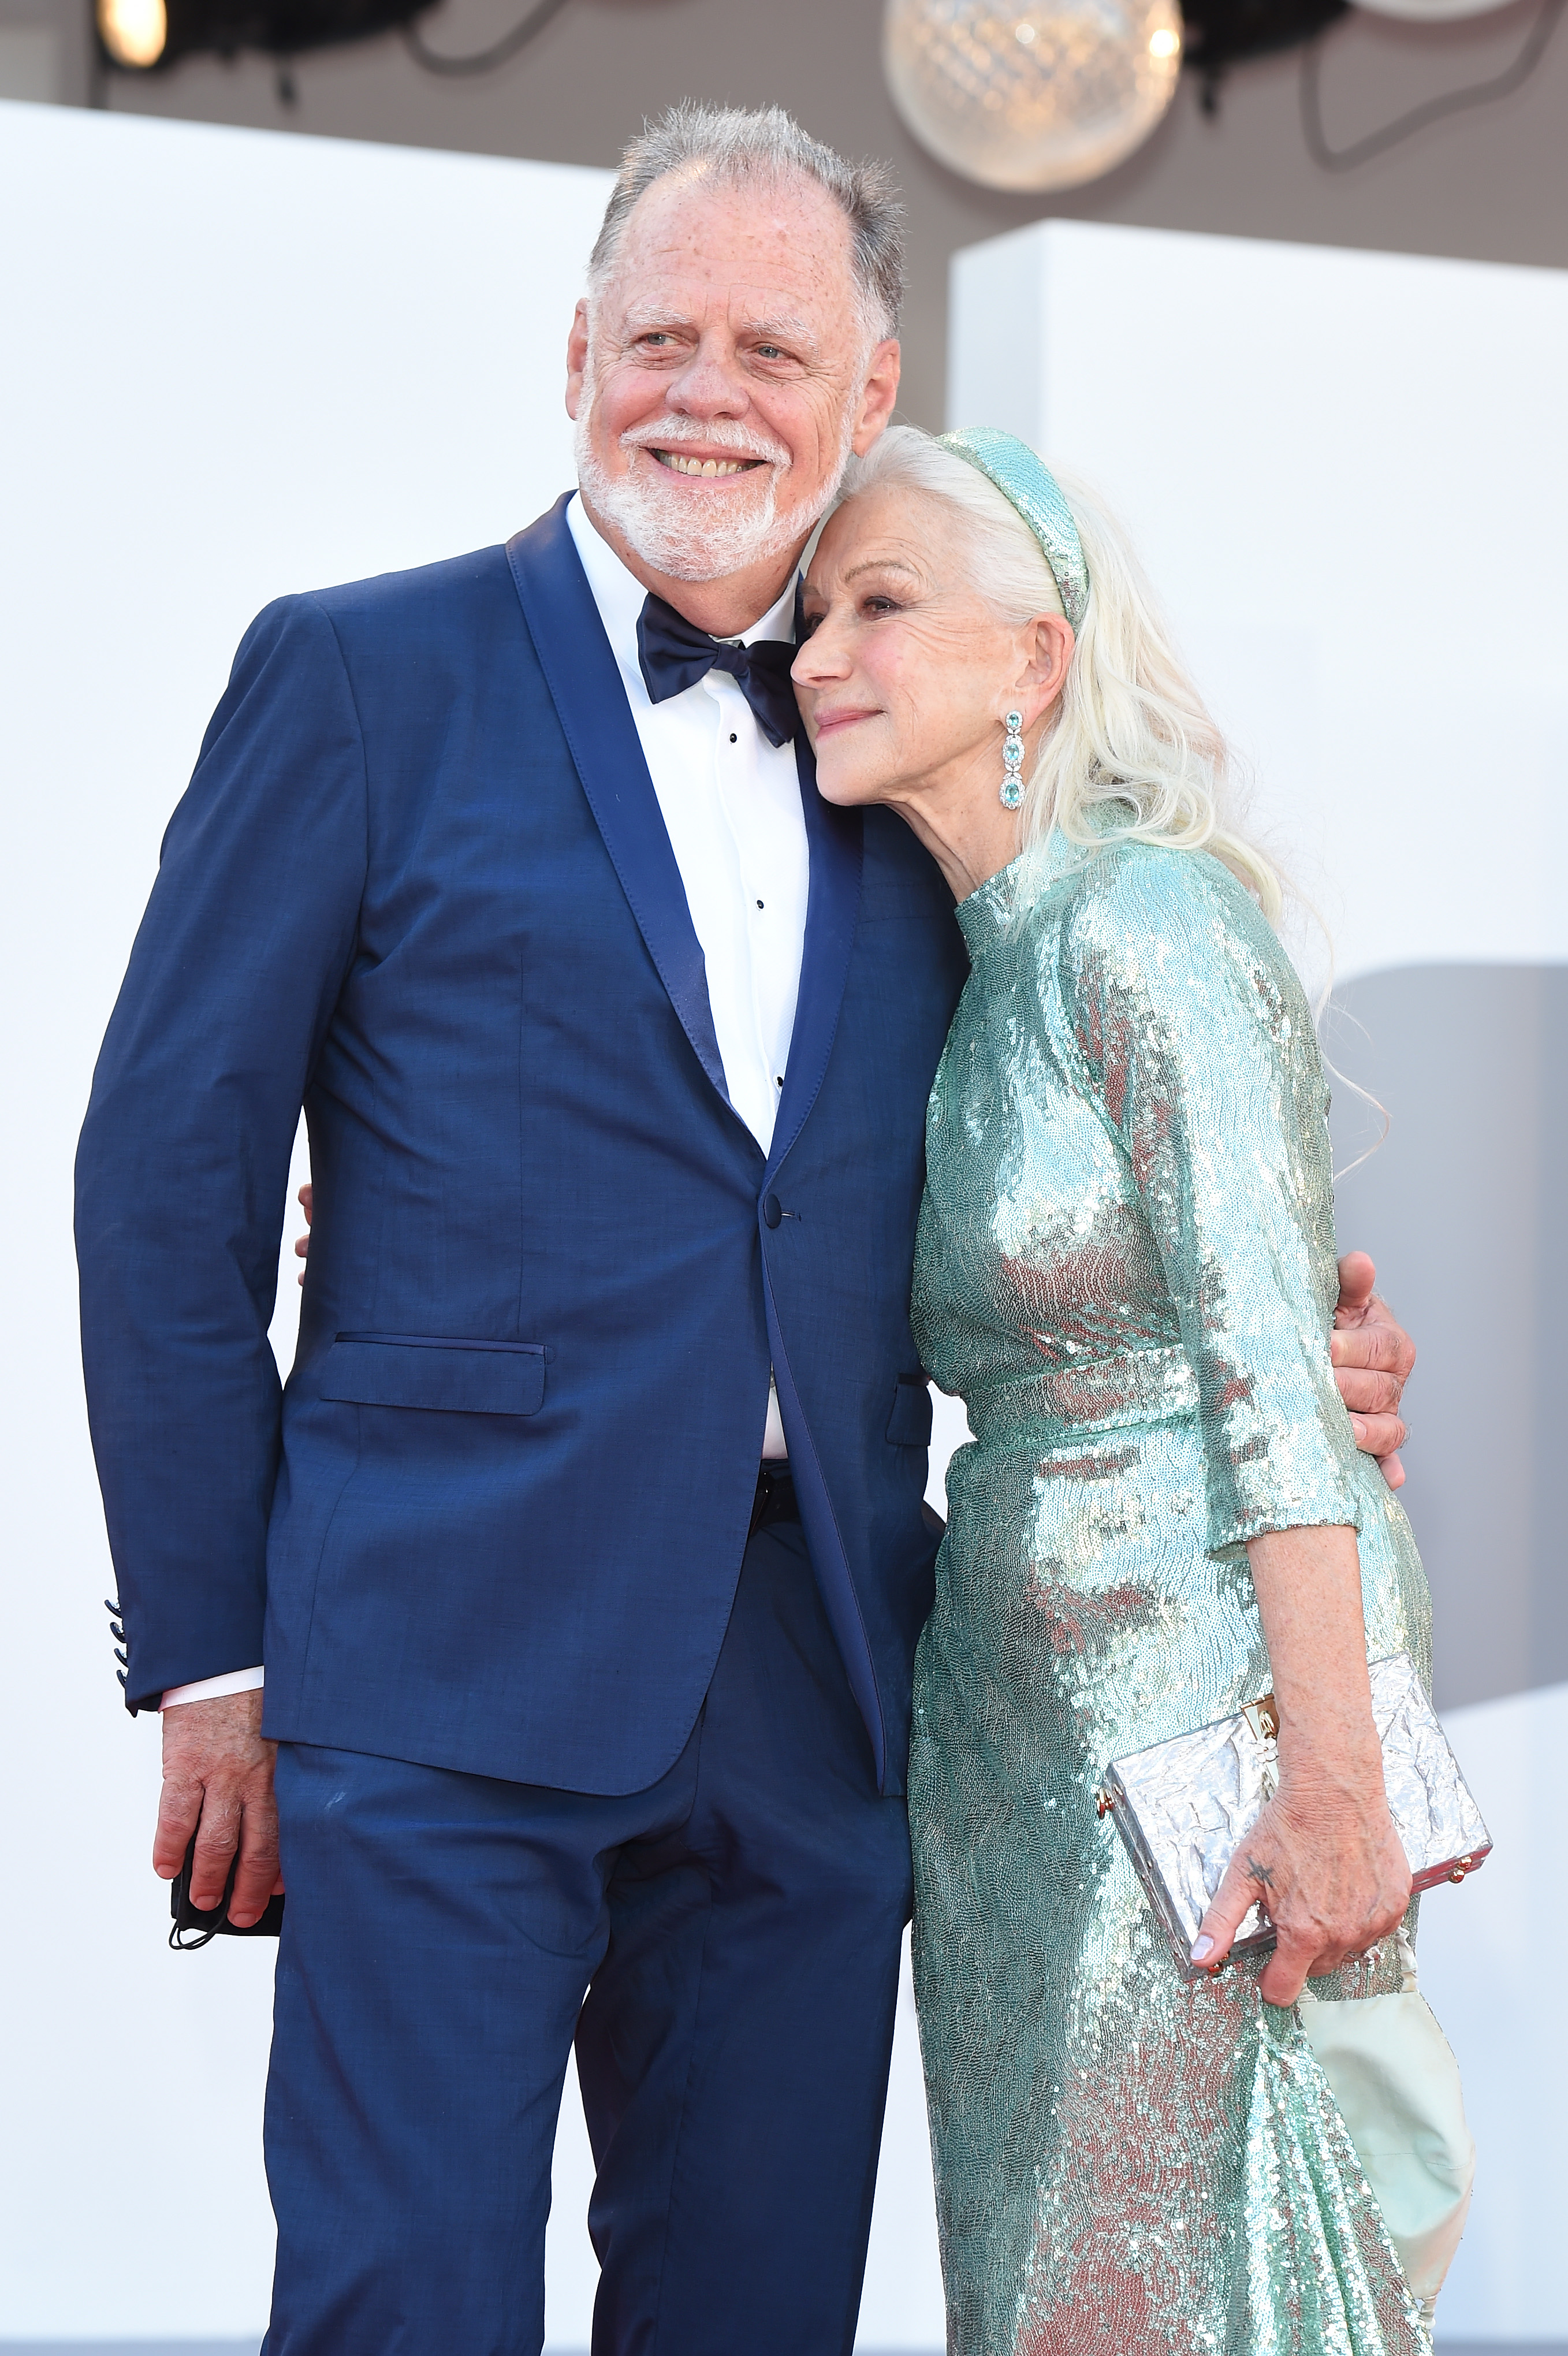 Taylor Hackford and Helen Mirren at the red carpet for the movie "Madres Paralelas" during the 78th Venice International Film Festival, on September 1, 2021, in Venice, Italy | Source: Getty Images